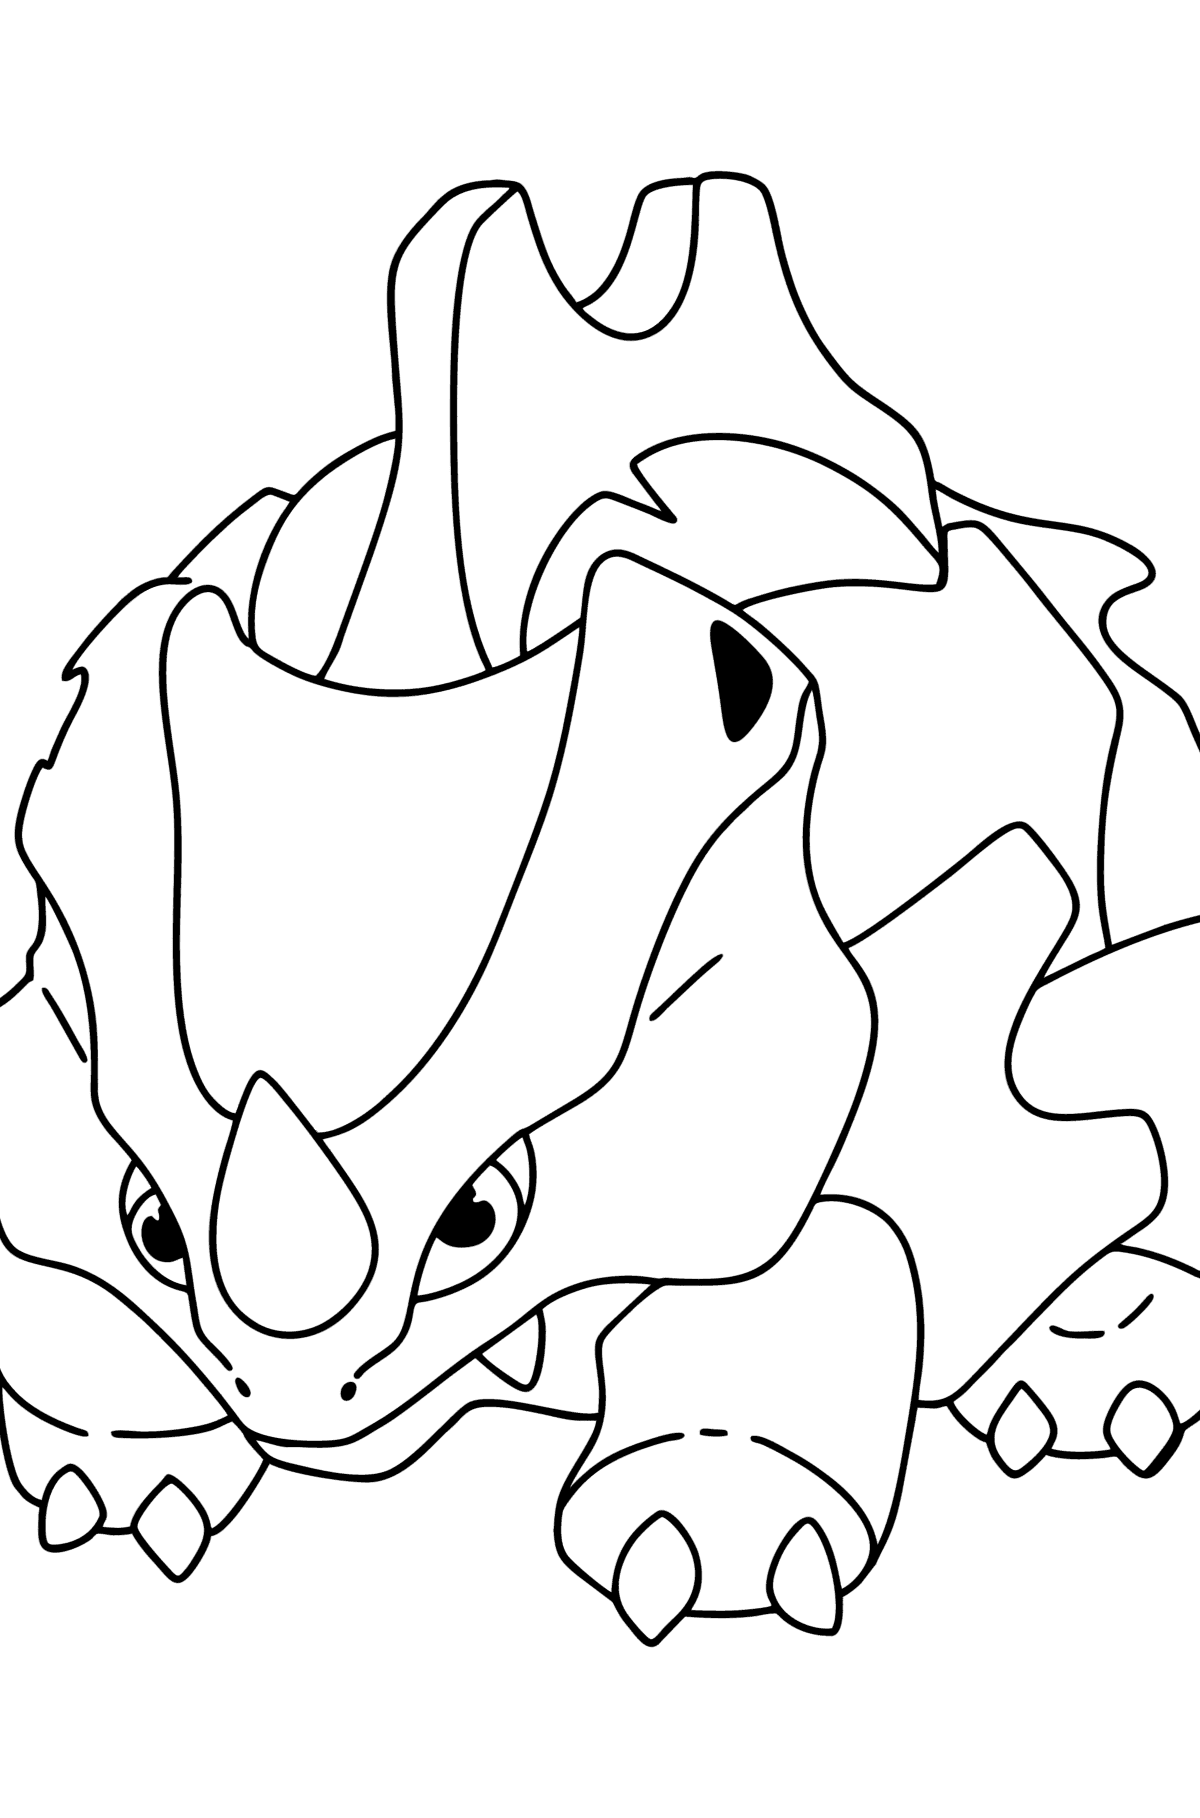 Coloring page Pokemon Go Rhyhorn - Coloring Pages for Kids